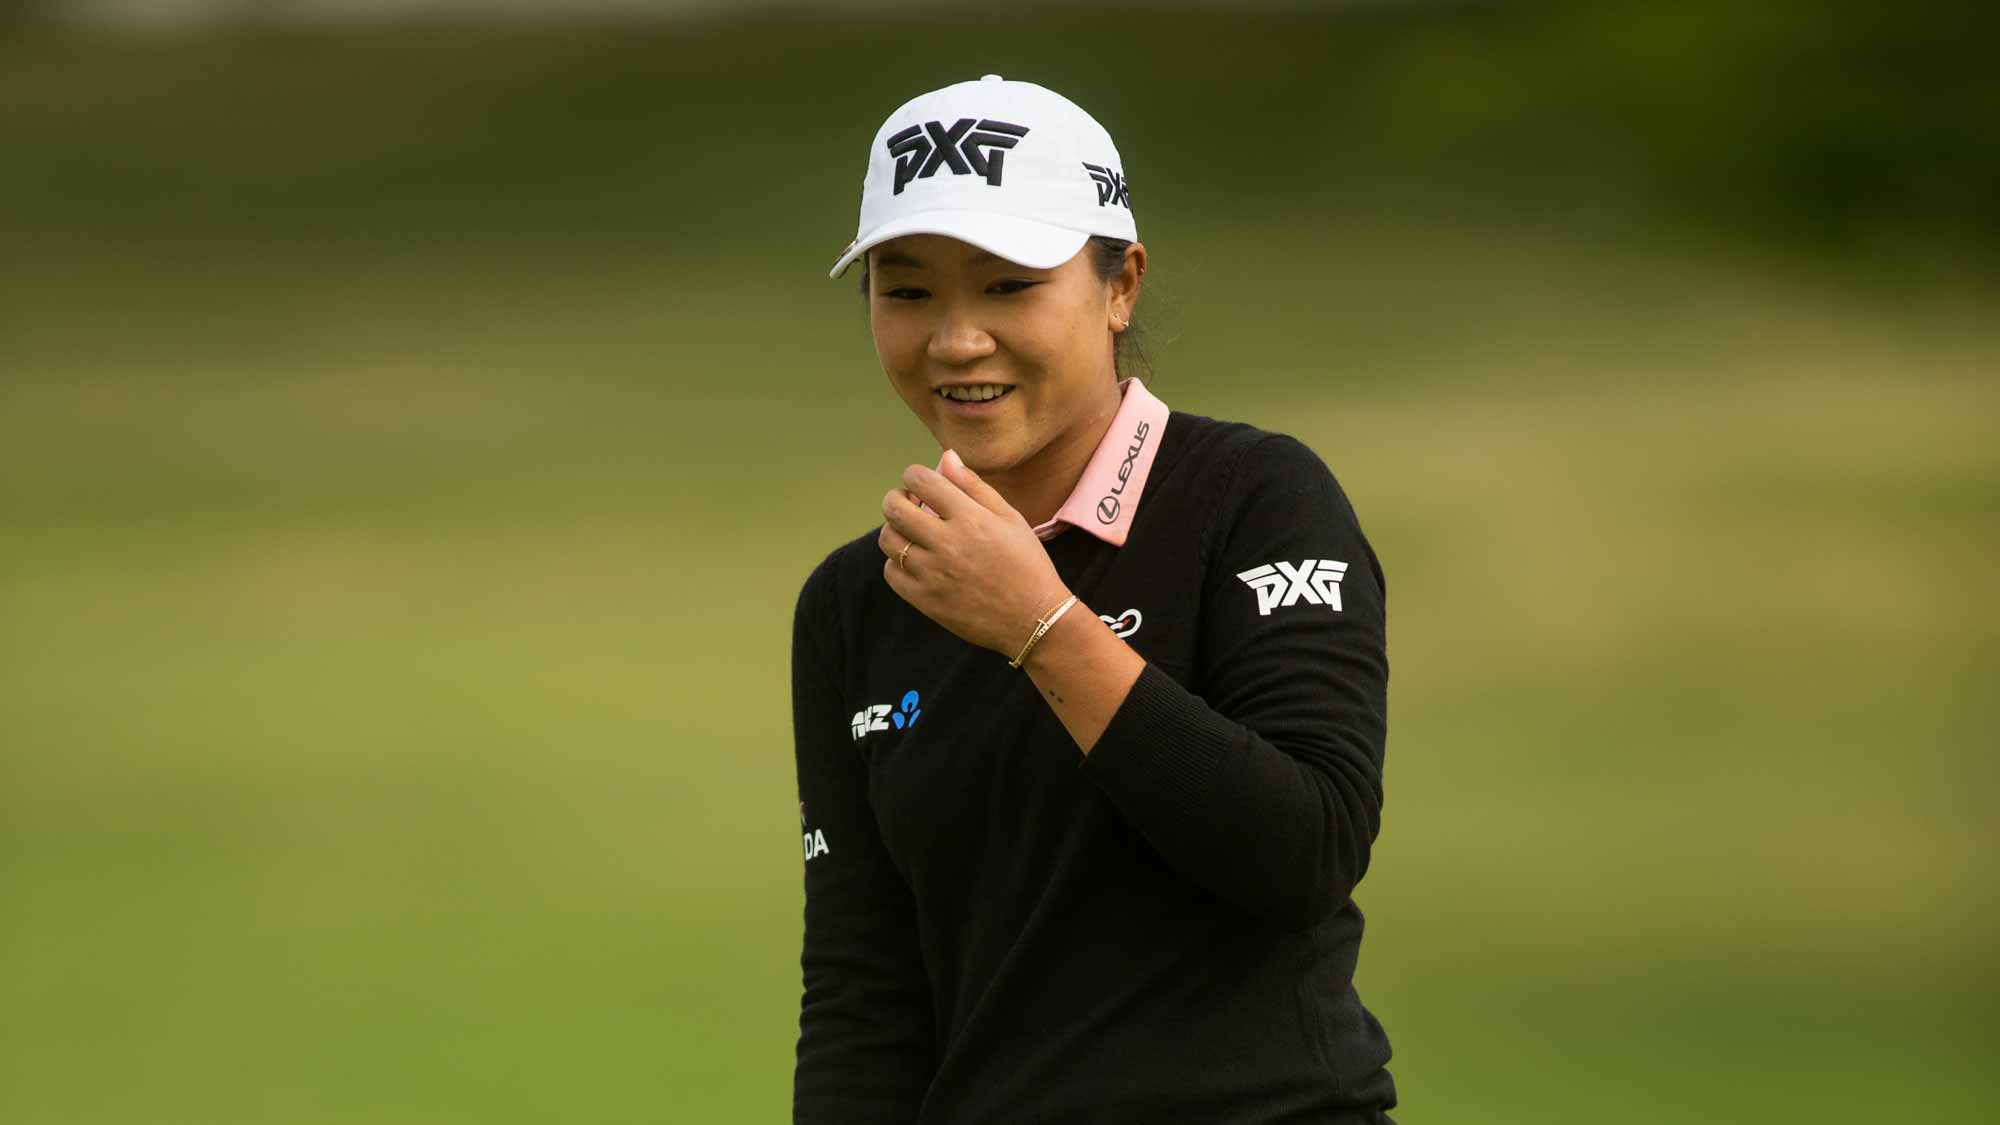 Lydia Ko of New Zealand reacts to a putt at the third hole during the first round of the Volunteers of America North Texas Shootout at Las Colinas Country Club